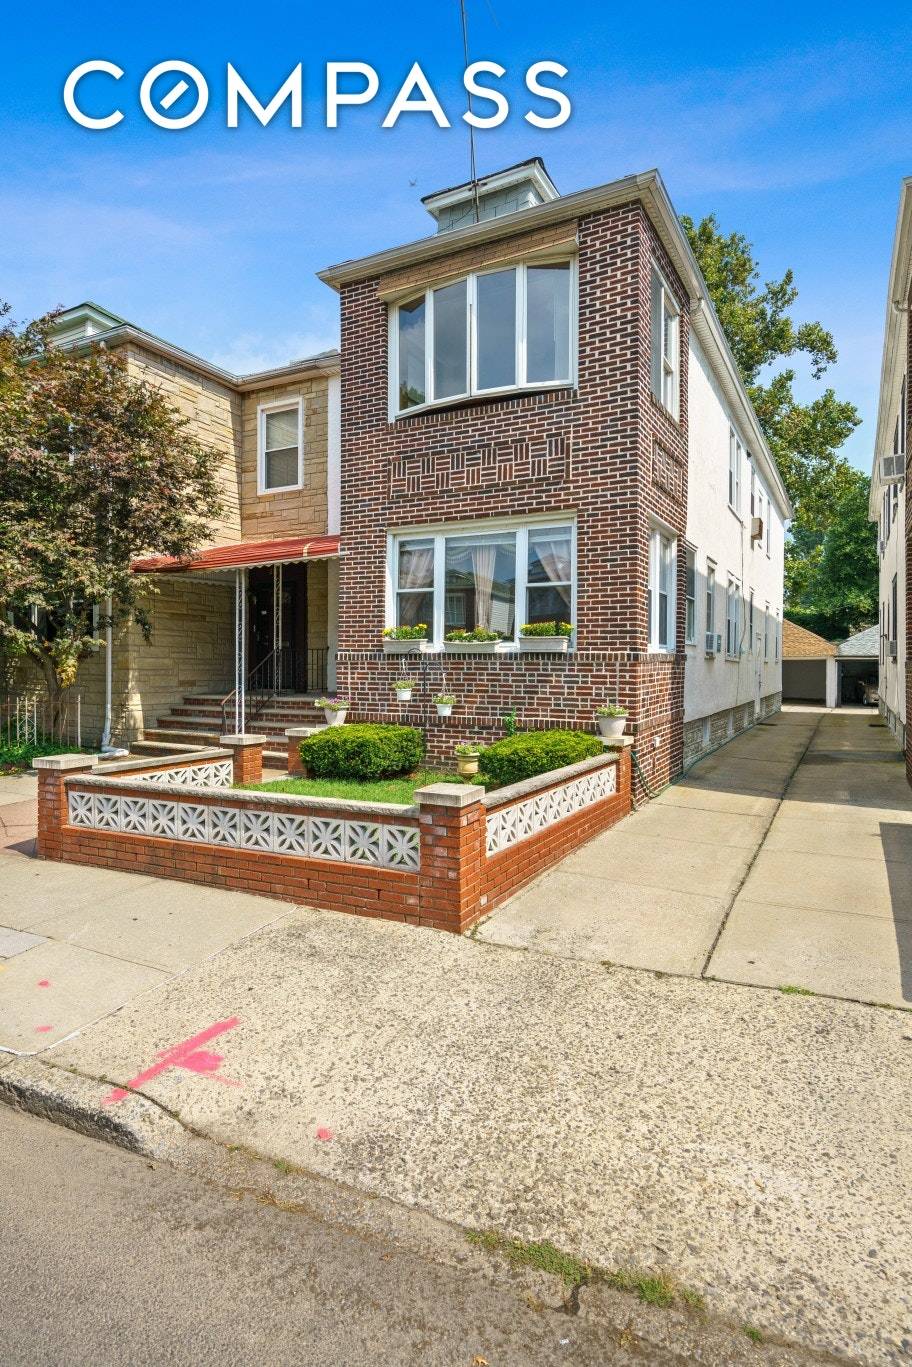 6811 Narrows ave is a quintessential Bay Ridge 2 family home that is semi detached with a 2 car garage and shared driveway.